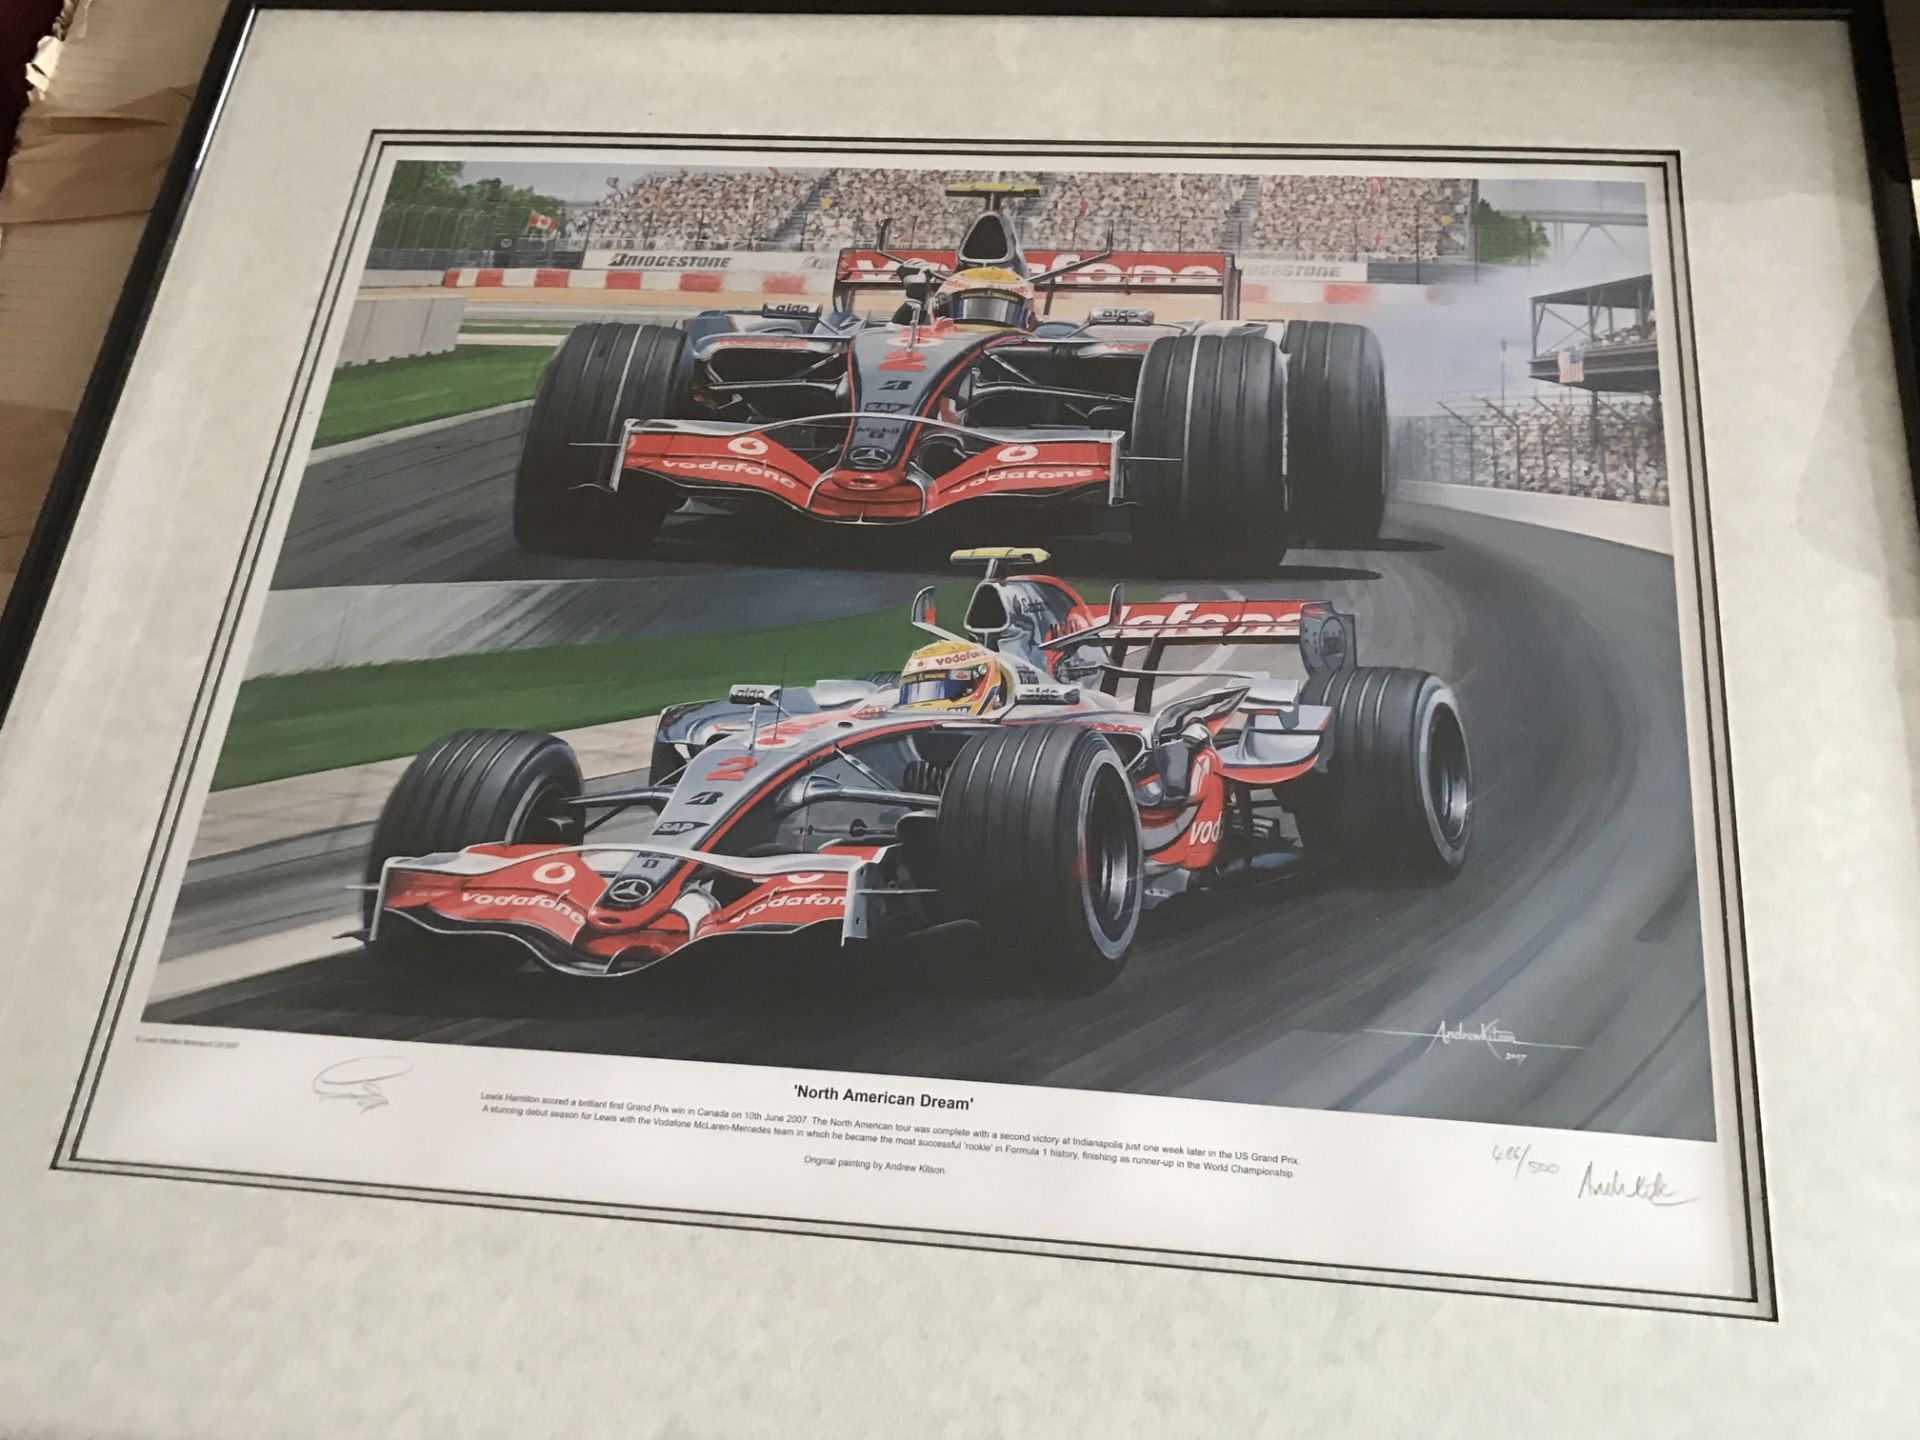 LEWIS HAMILTON SIGNED PRINT OF 2007 CANADIAN GRAND PRIX WITH C.O.A